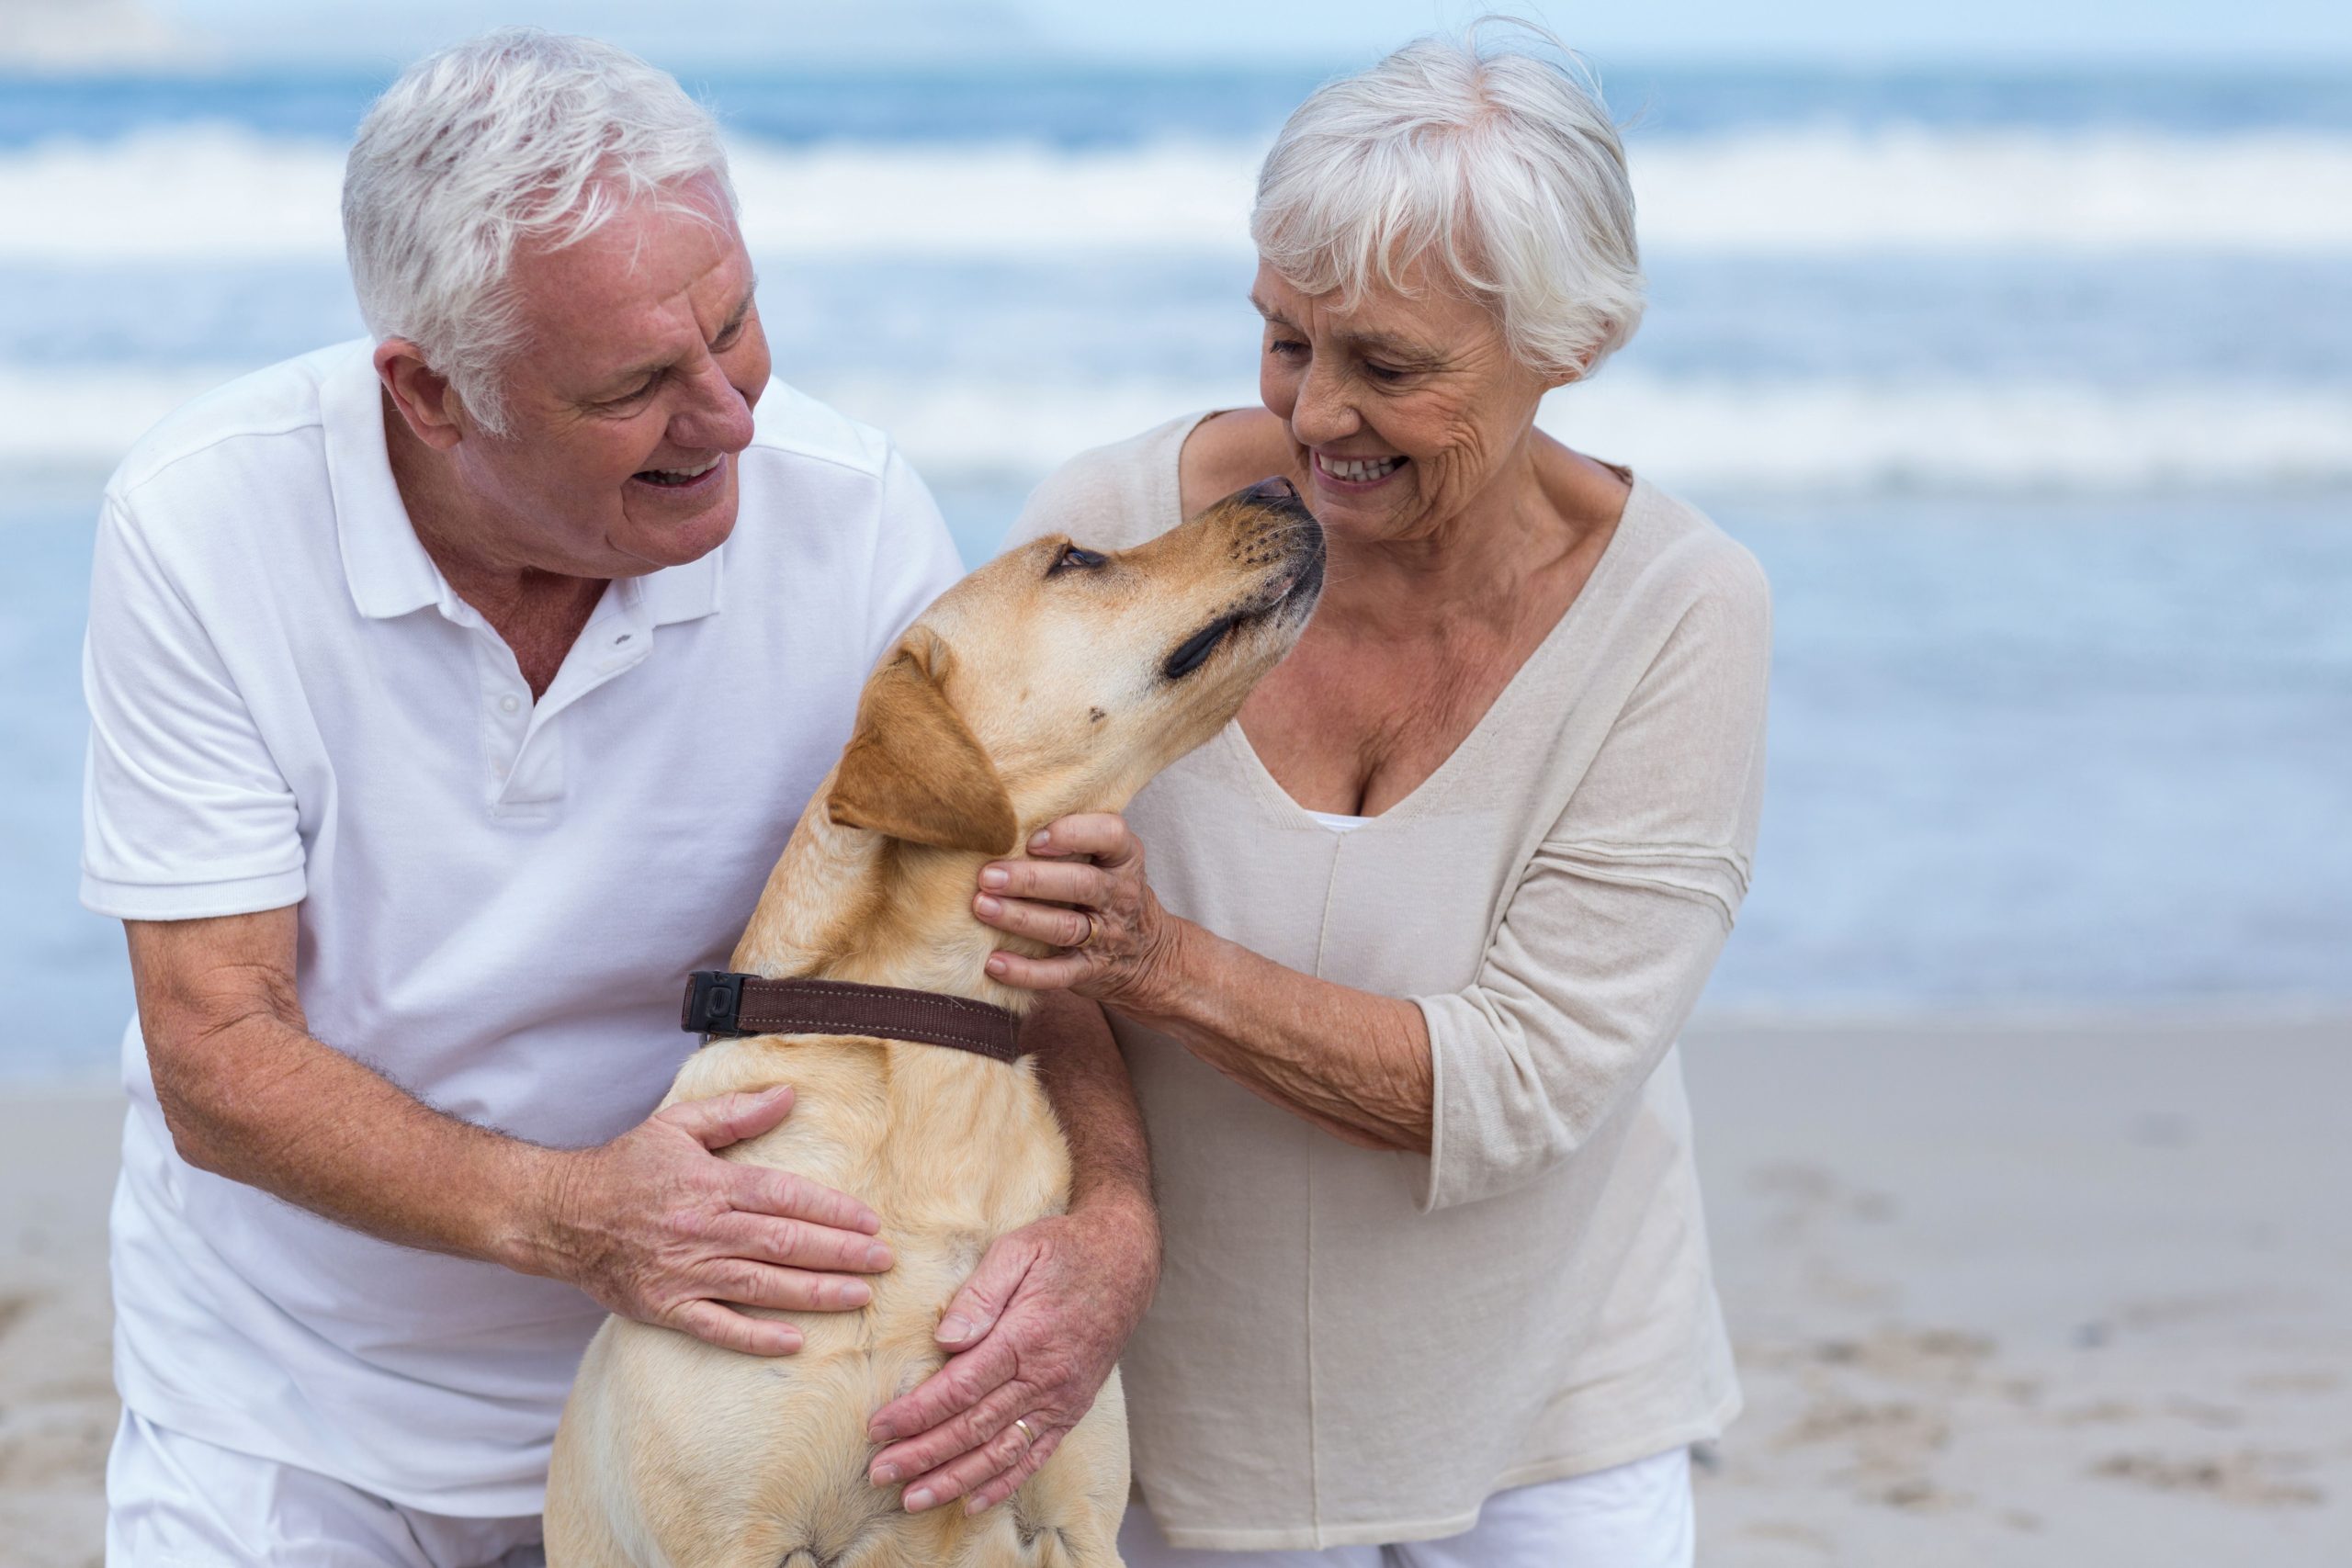 https://massanuttenfinancial.com/wp-content/uploads/2021/12/pikwizard-senior-couple-playing-with-their-dog-on-the-beach-scaled.jpg